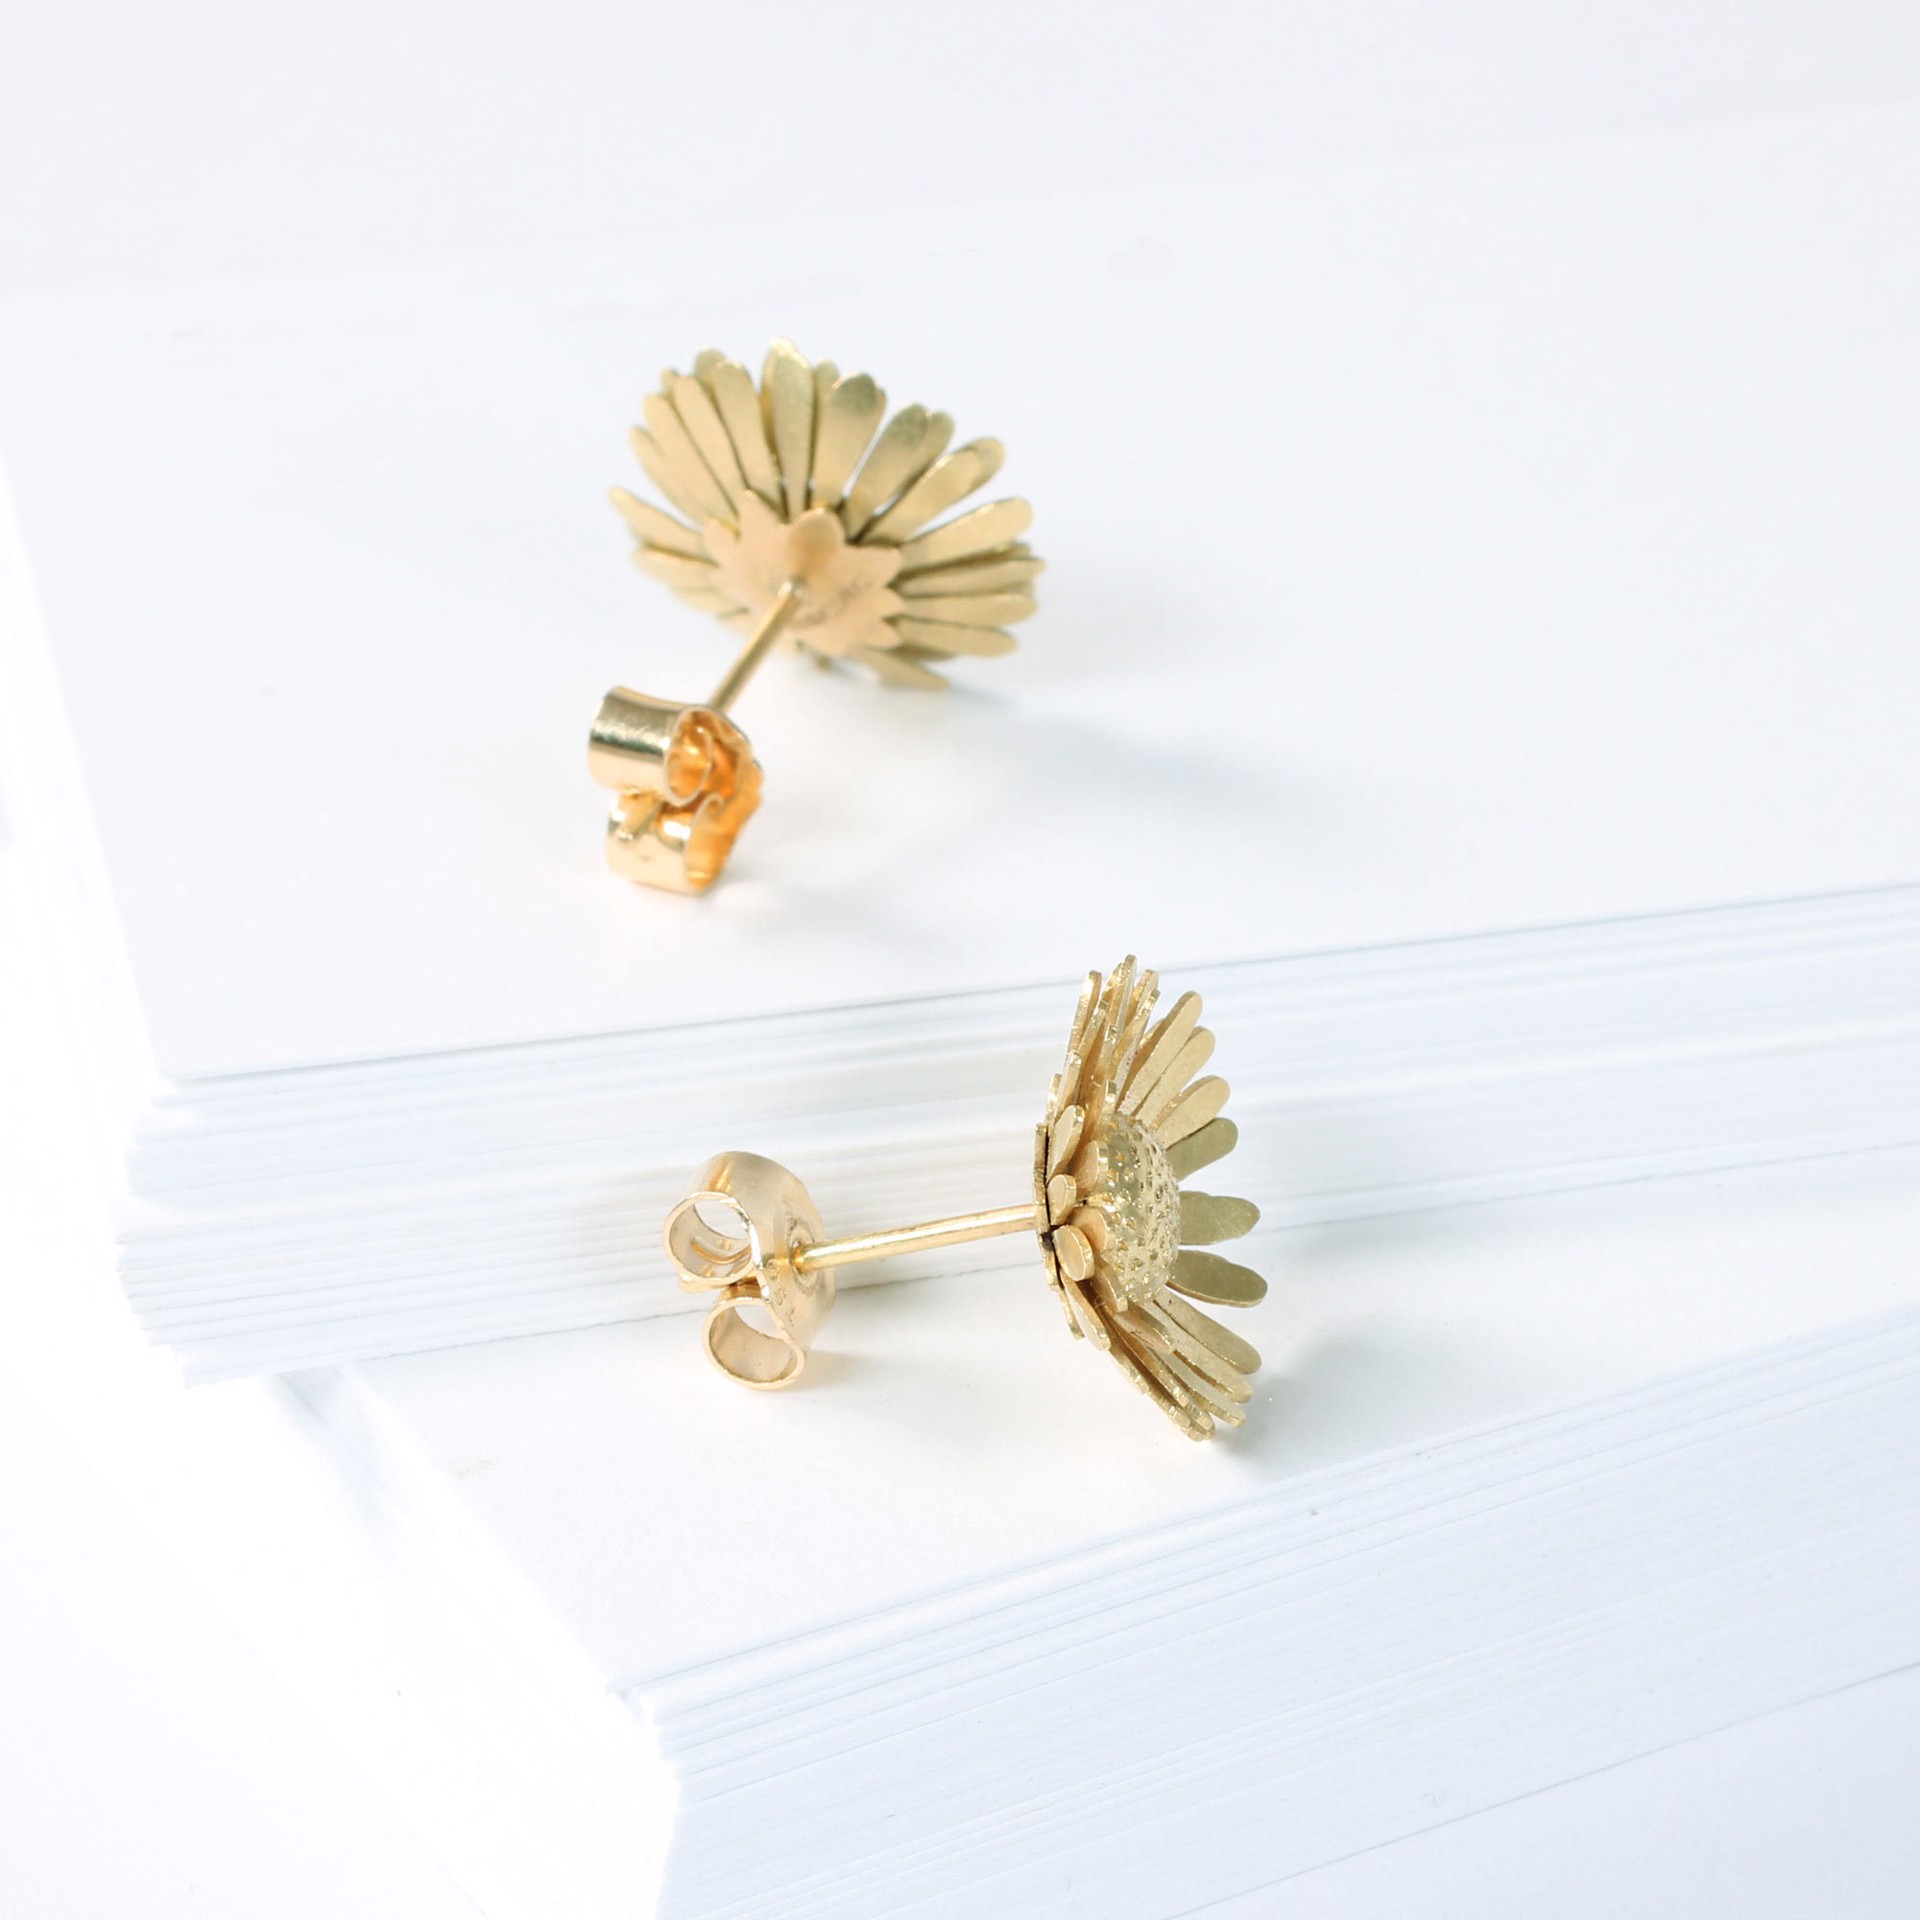 Golden Daisy Earrings by Christopher Thompson Royds